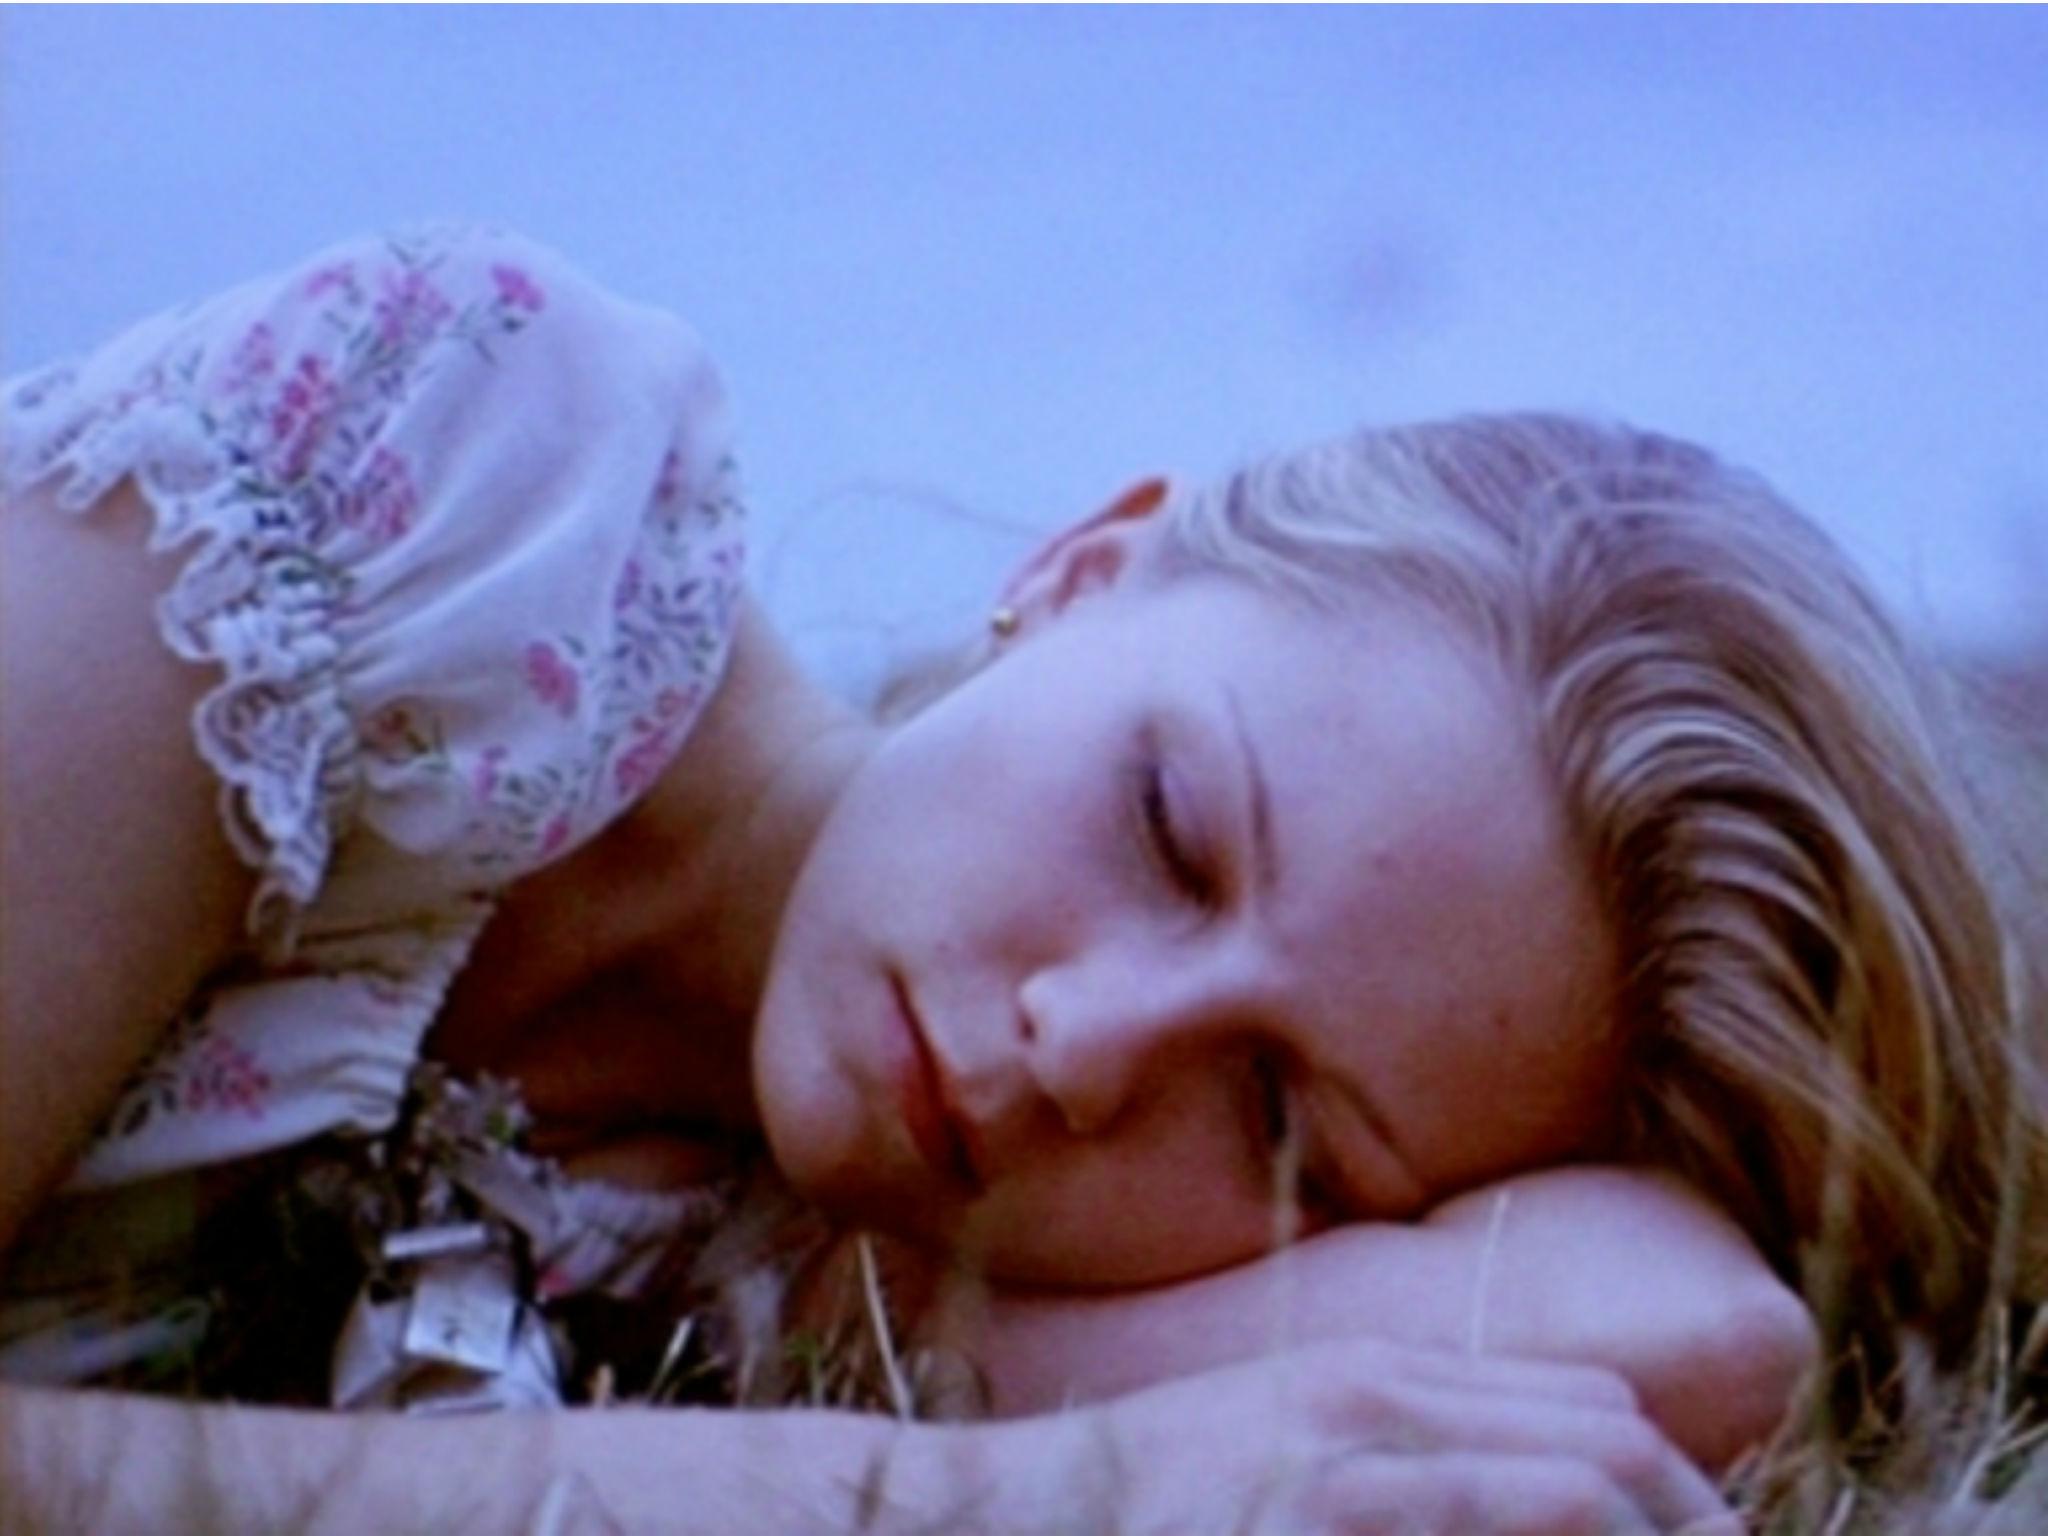 Kirsten Dunst as Lux Lisbon in 'The Virgin Suicides' which is directed by Sofia Coppola